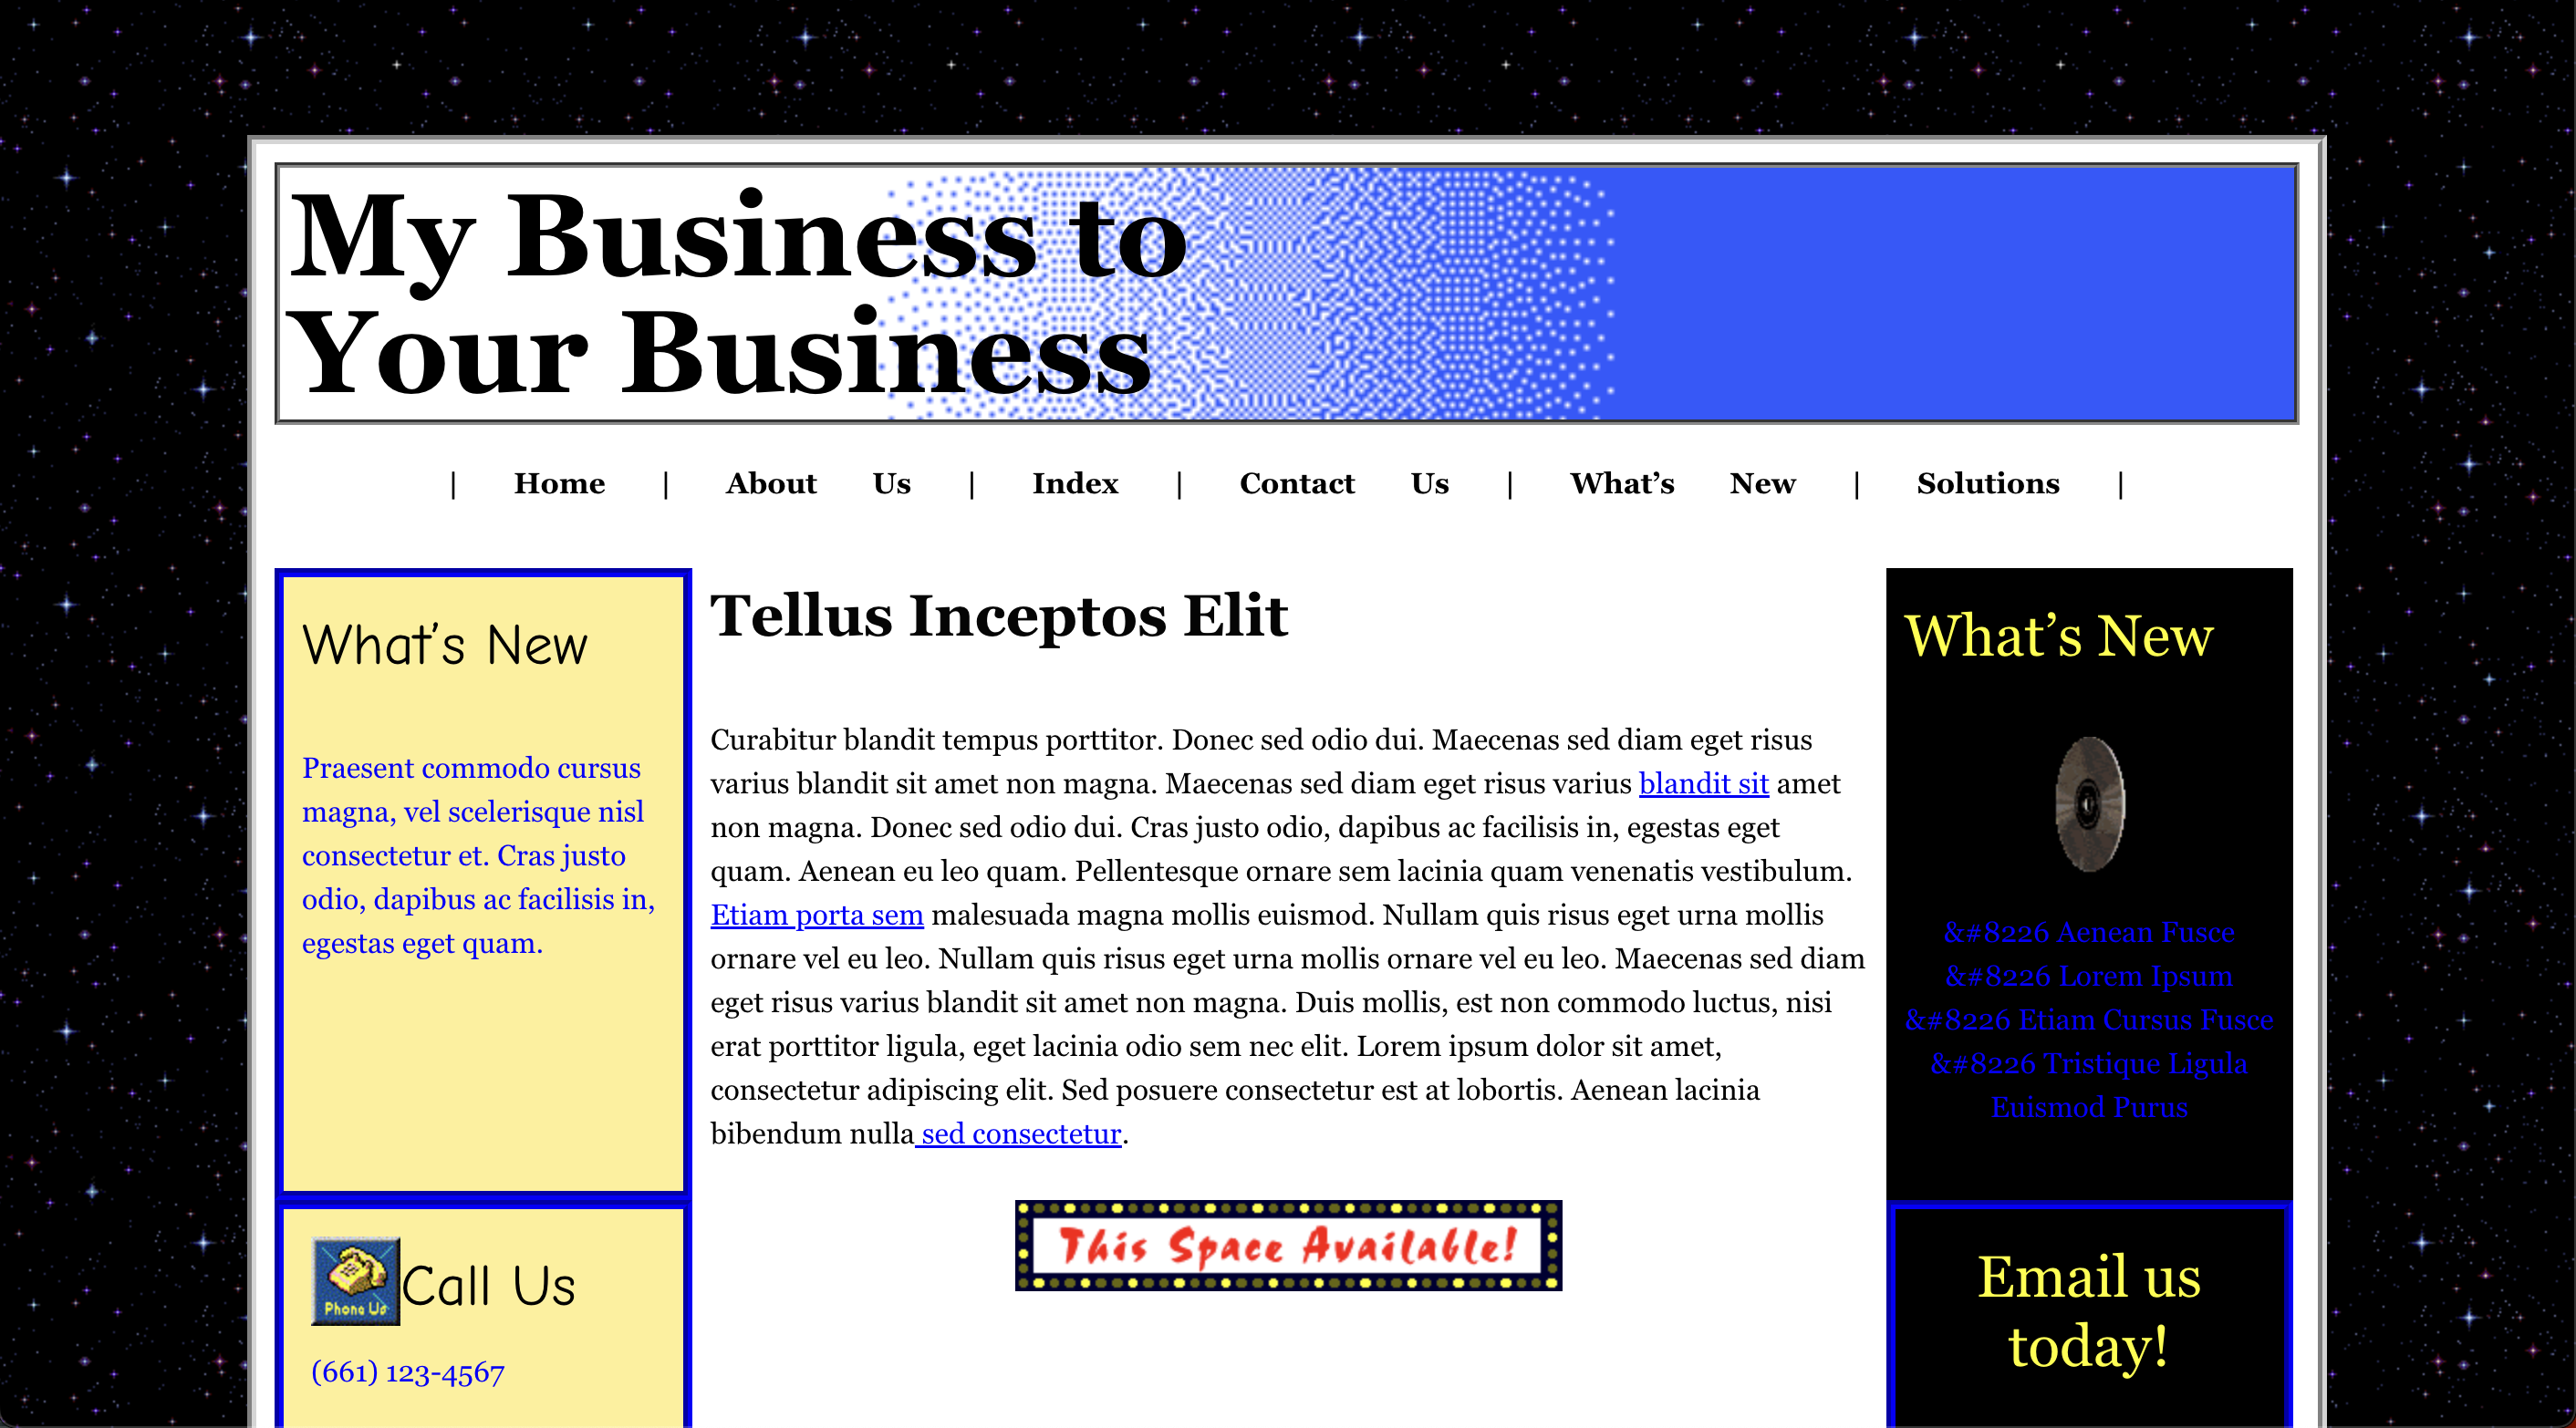 Old website shown before redesign